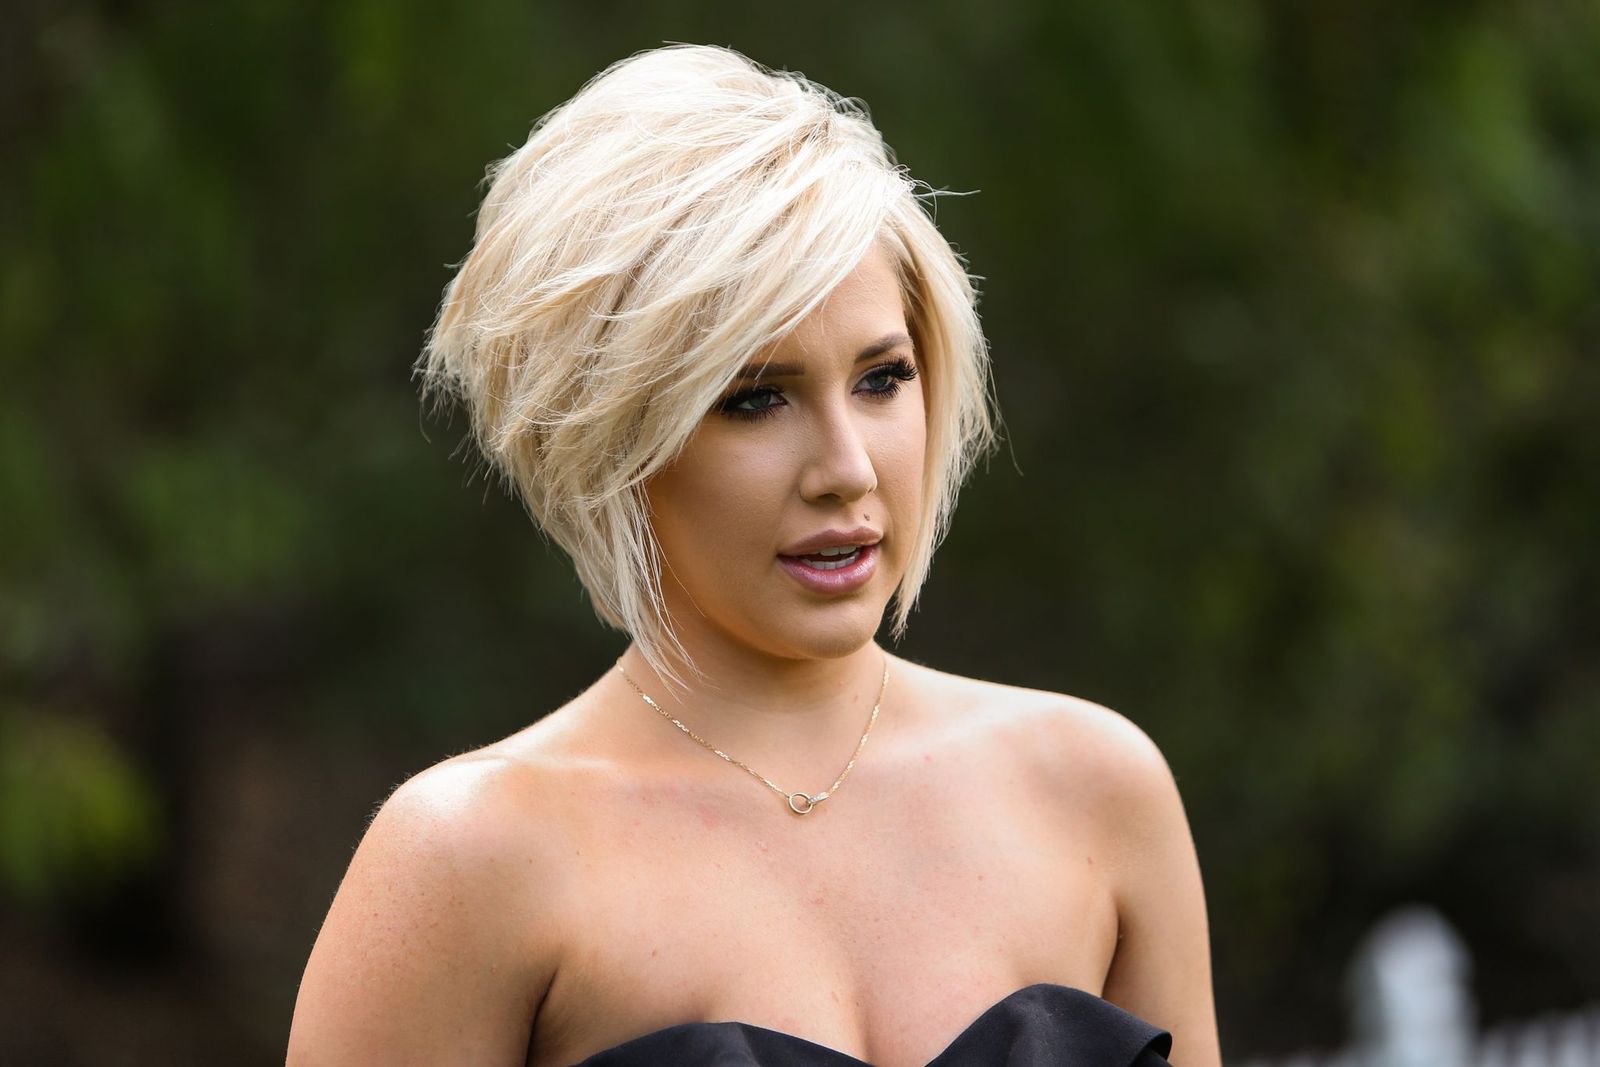 Savannah Chrisley visits "Home & Family" at Universal Studios Hollywood on March 27, 2019, in Universal City, California | Photo: Getty Images